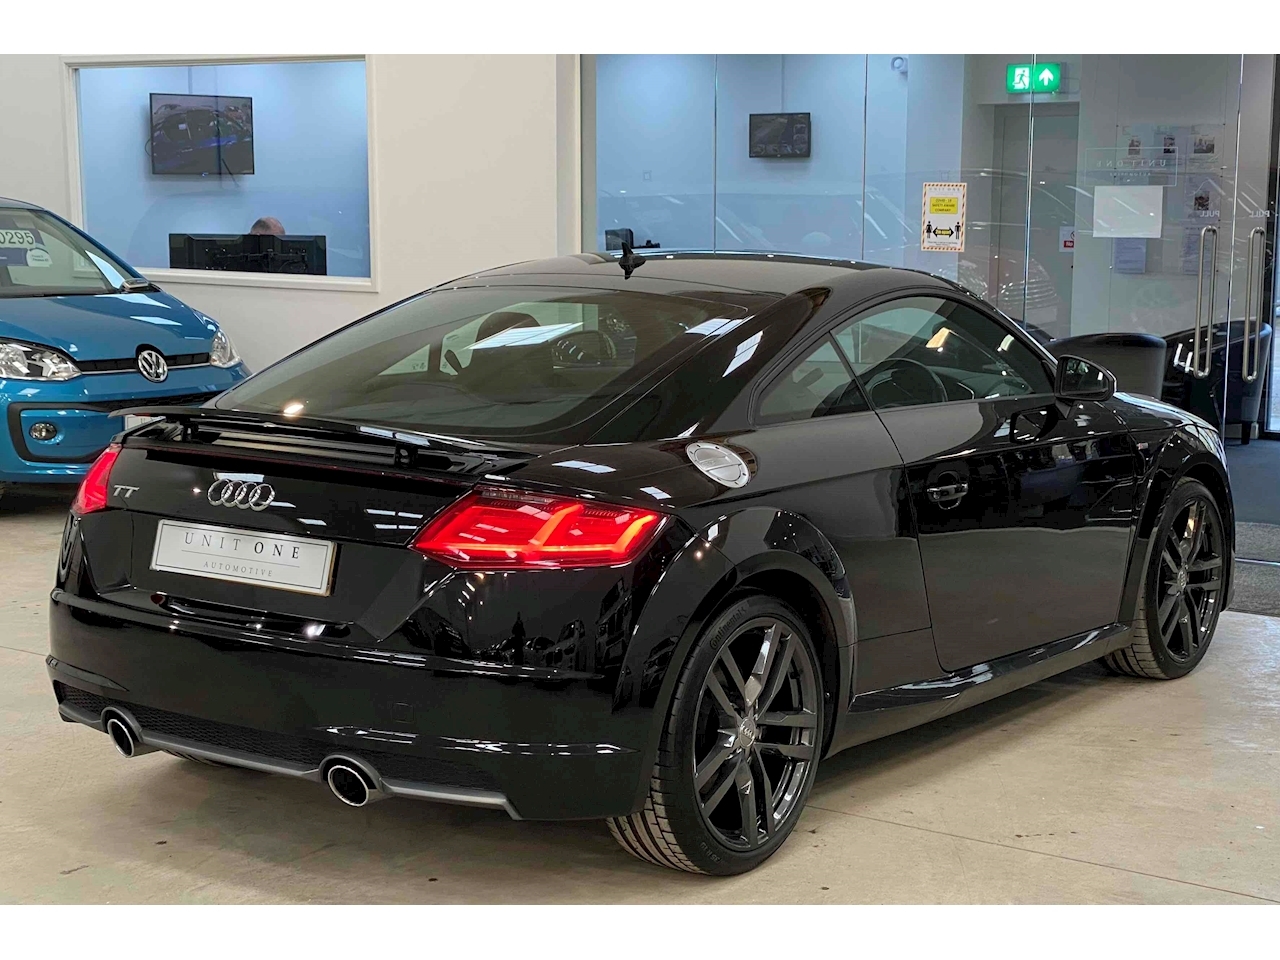 2.0 TFSI S line Coupe 3dr Petrol (s/s) (230 ps)